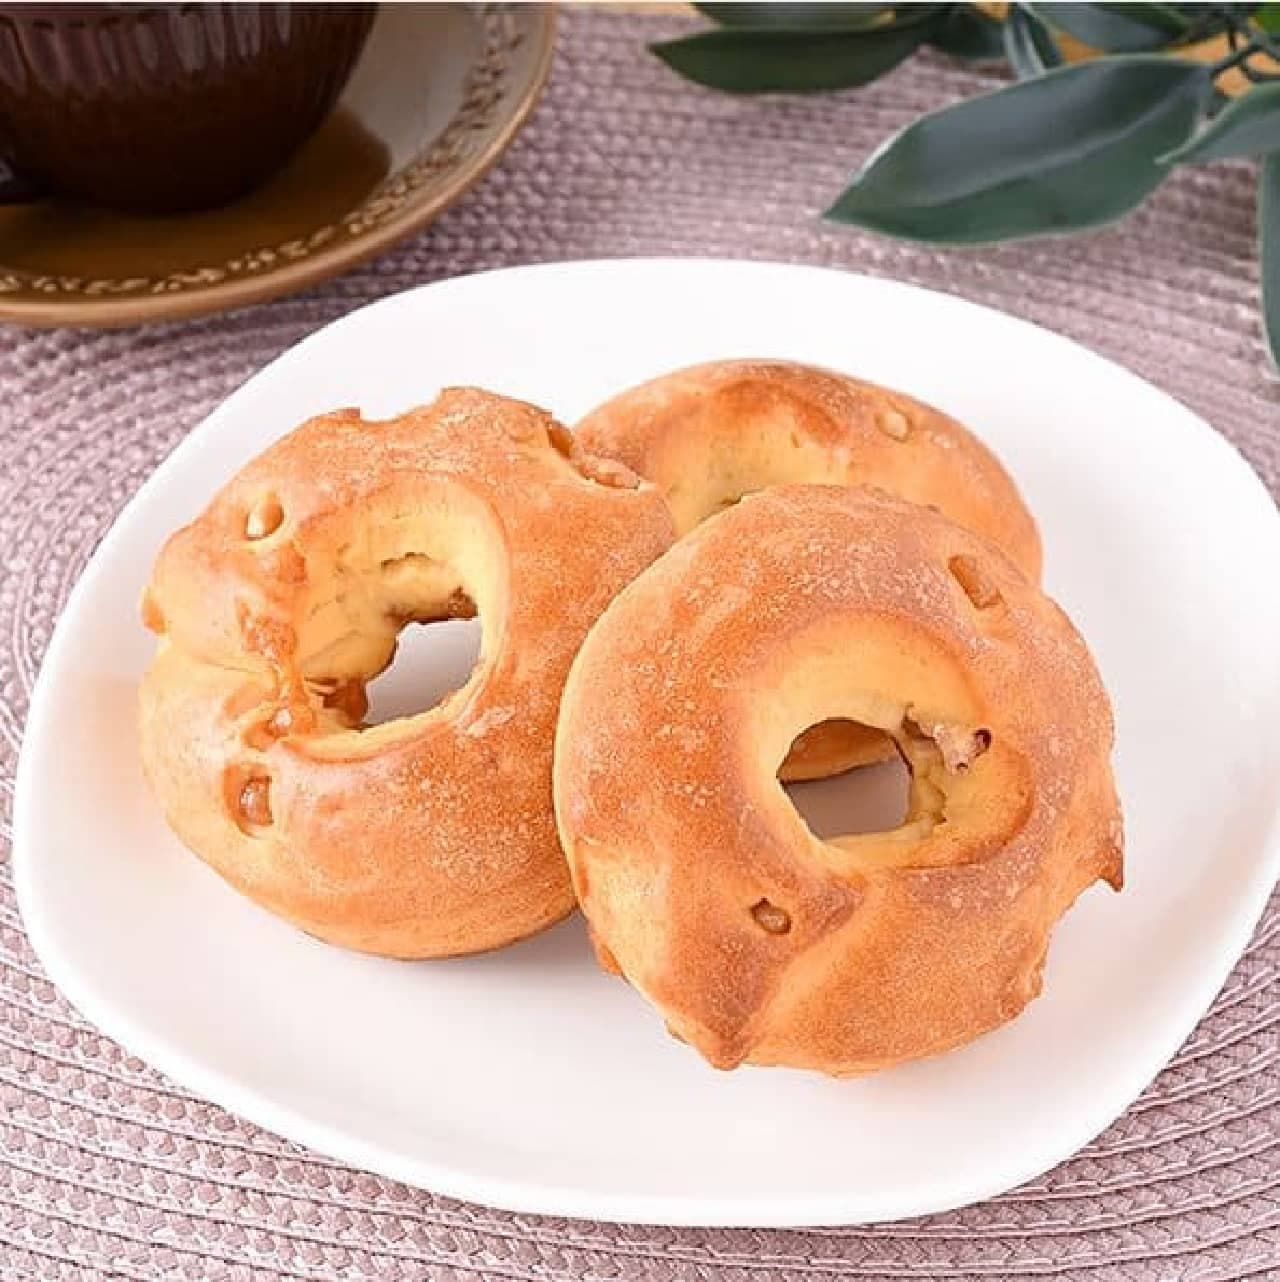 FamilyMart "Butter-scented maple rings, 3 pieces